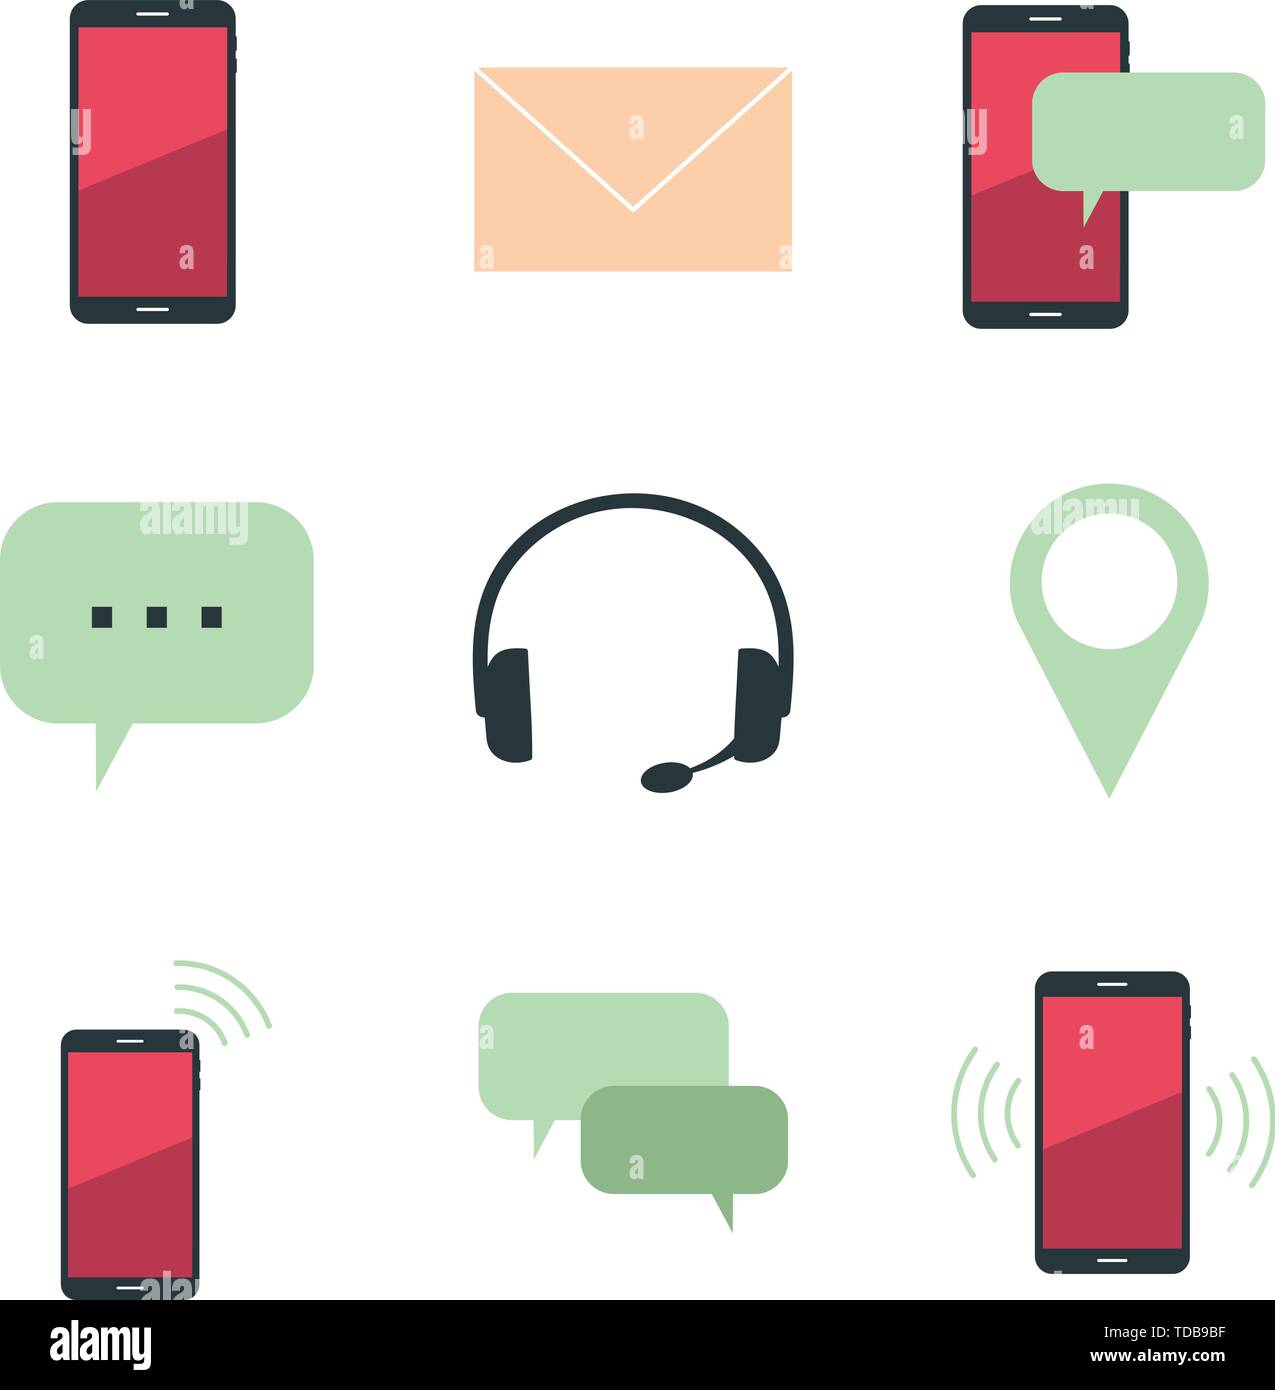 Illustrated icon set of contact symbols for texting, calling, chatting, and writing. Includes a location pin, envelope, and several options for phones Stock Vector